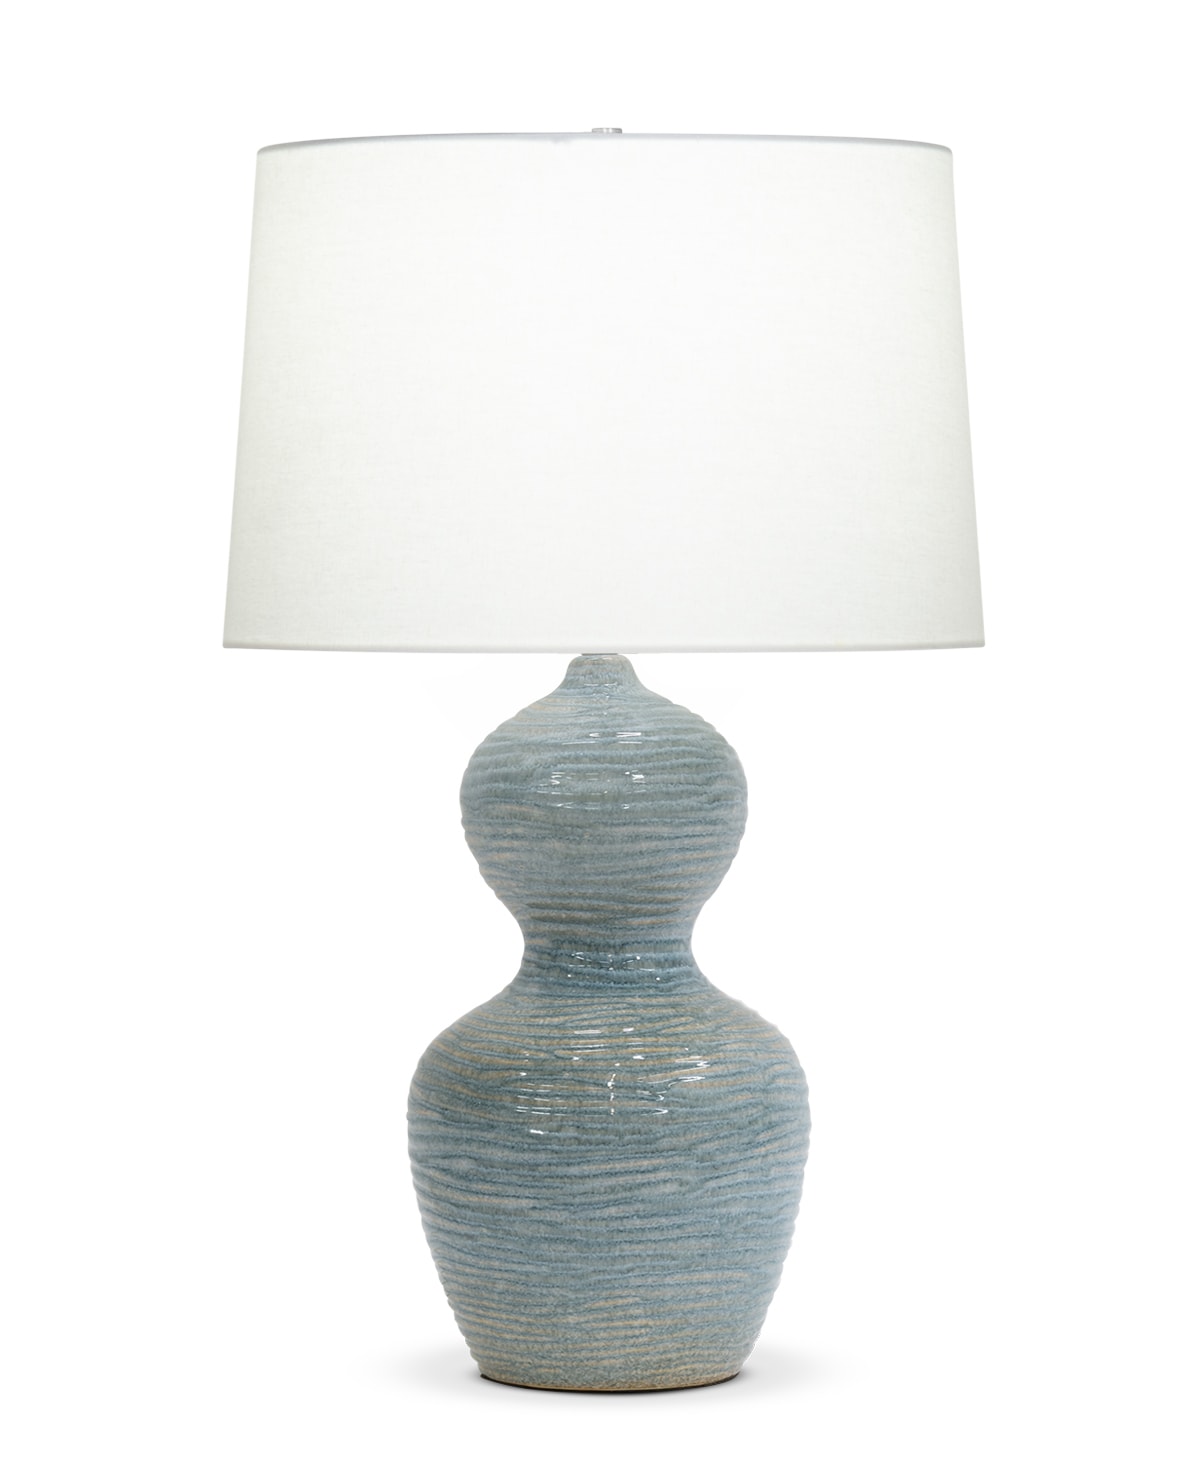 FlowDecor Theresa Table Lamp in ceramic with blue & sand finish and off-white linen tapered drum shade (# 4572)